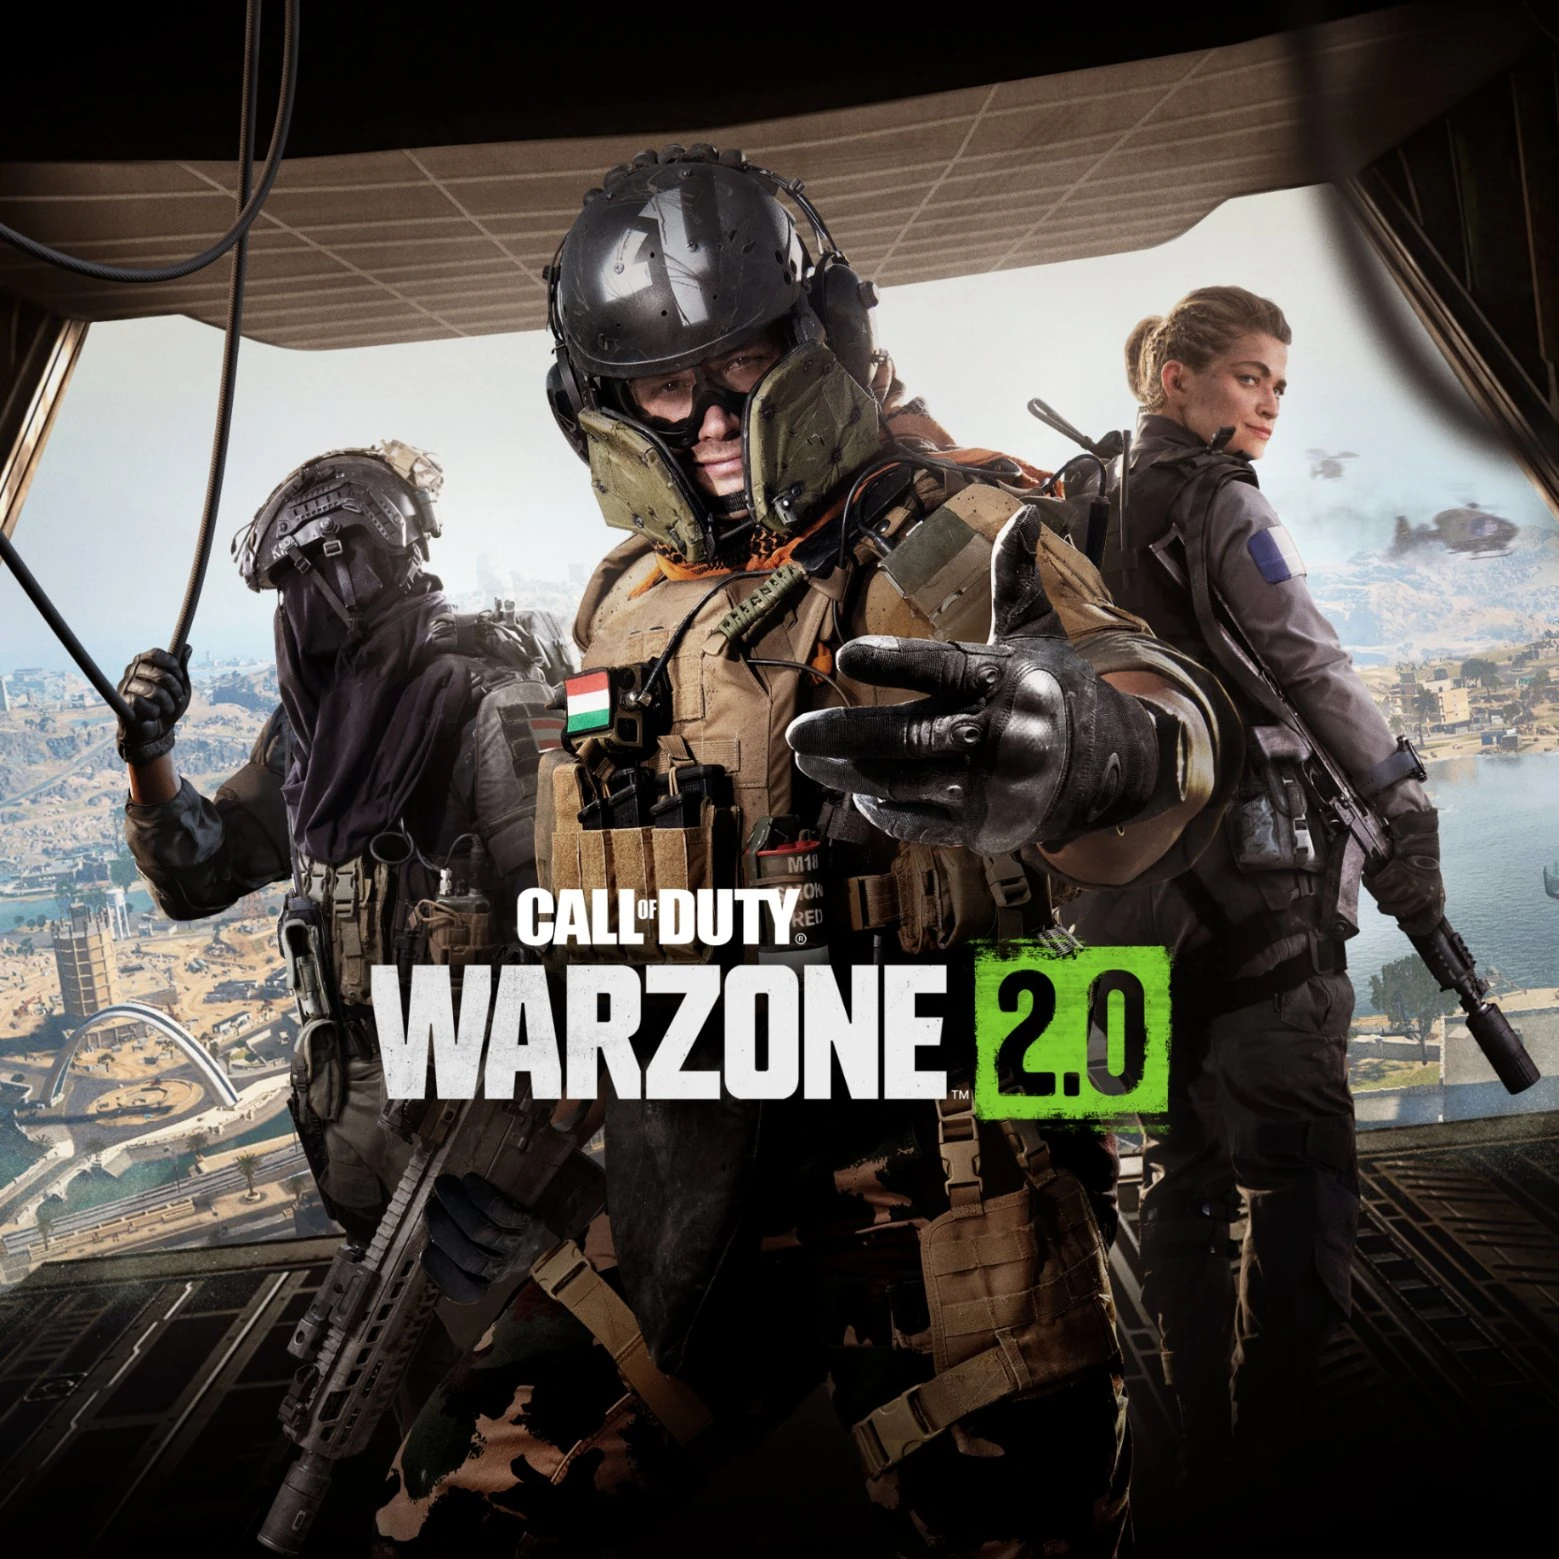 Call of Duty: WARZONE 2.0